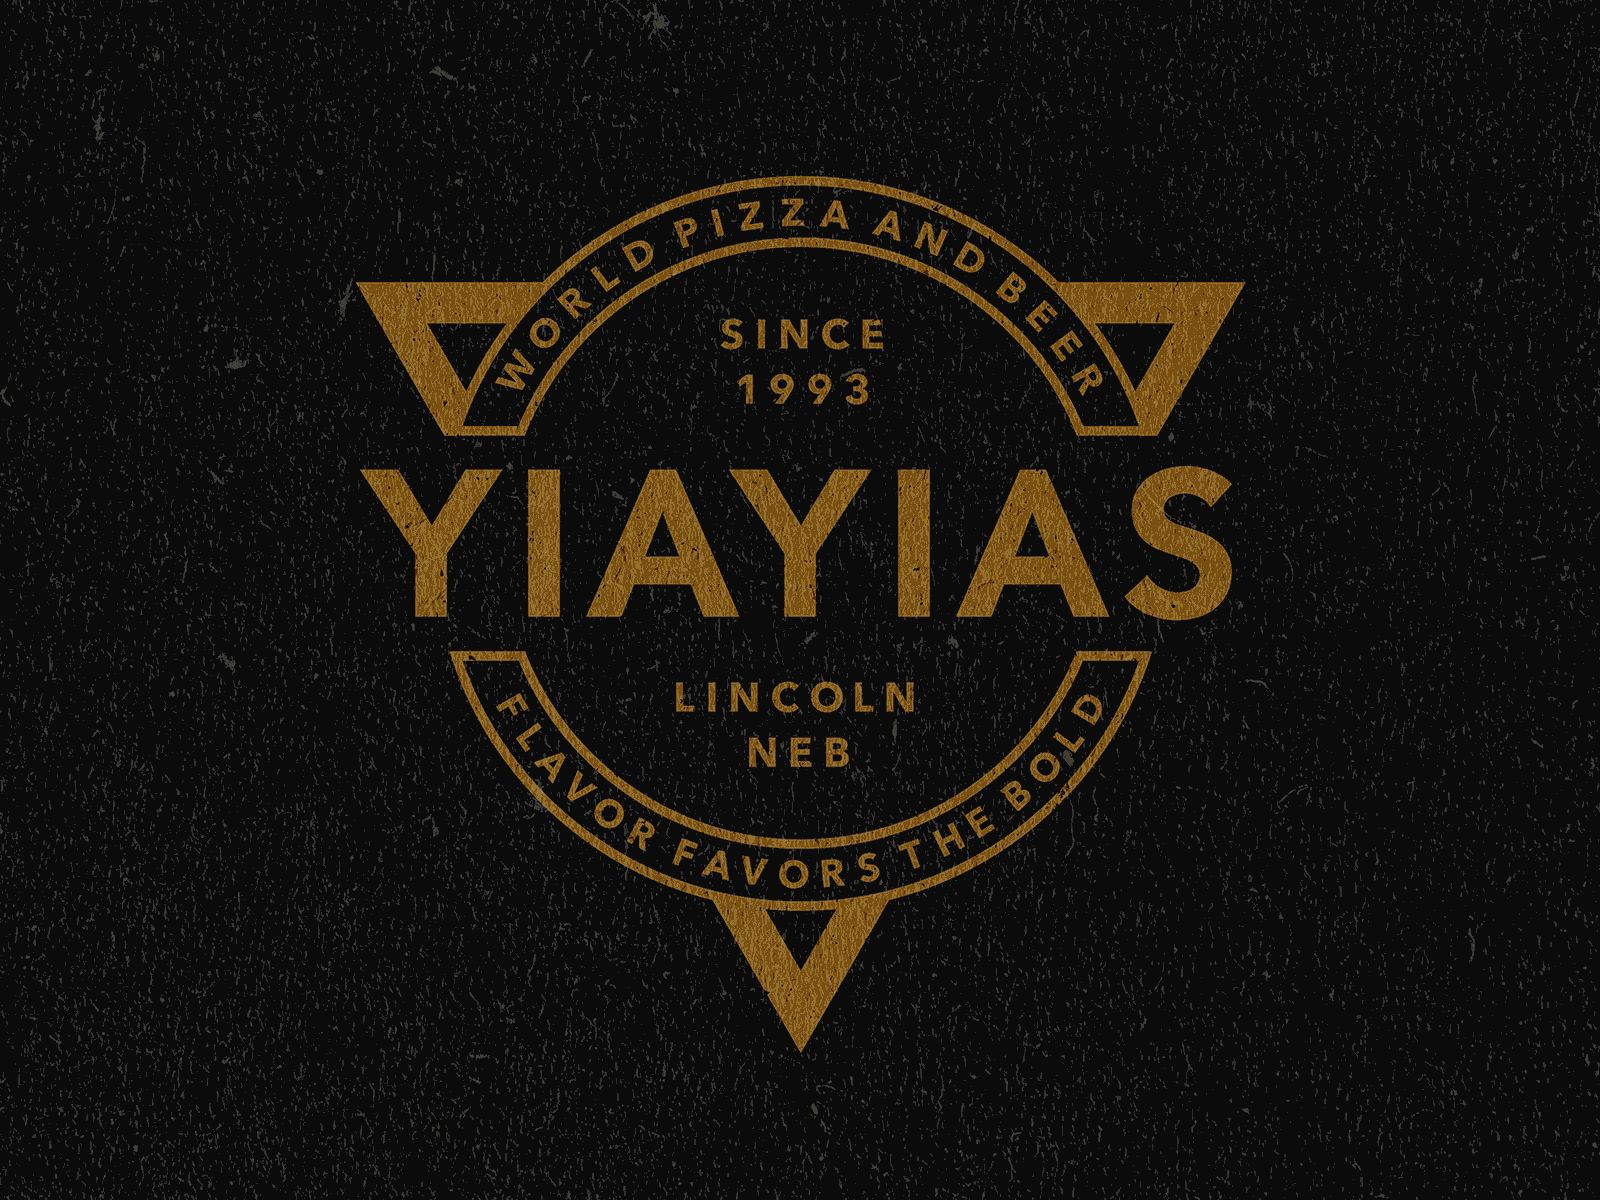 YiaYias World Pizza and Beer beer craft logo pizza